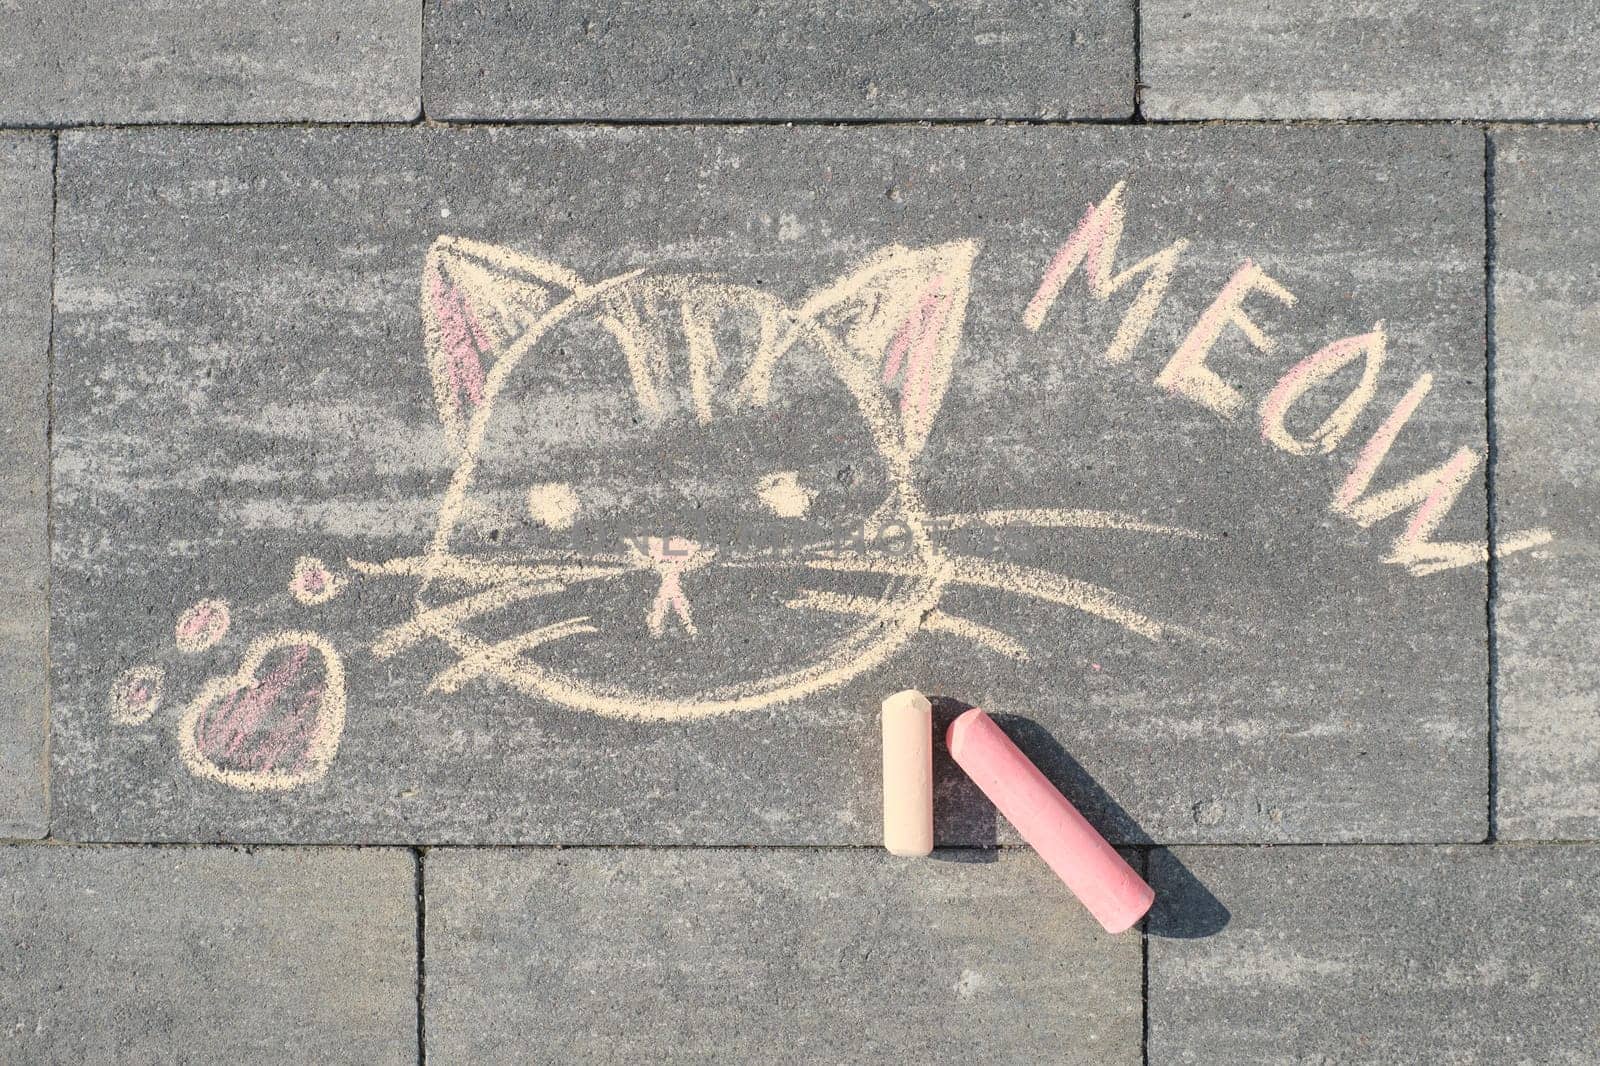 Meow text and cat picture written on gray sidewalk in crayons, top view